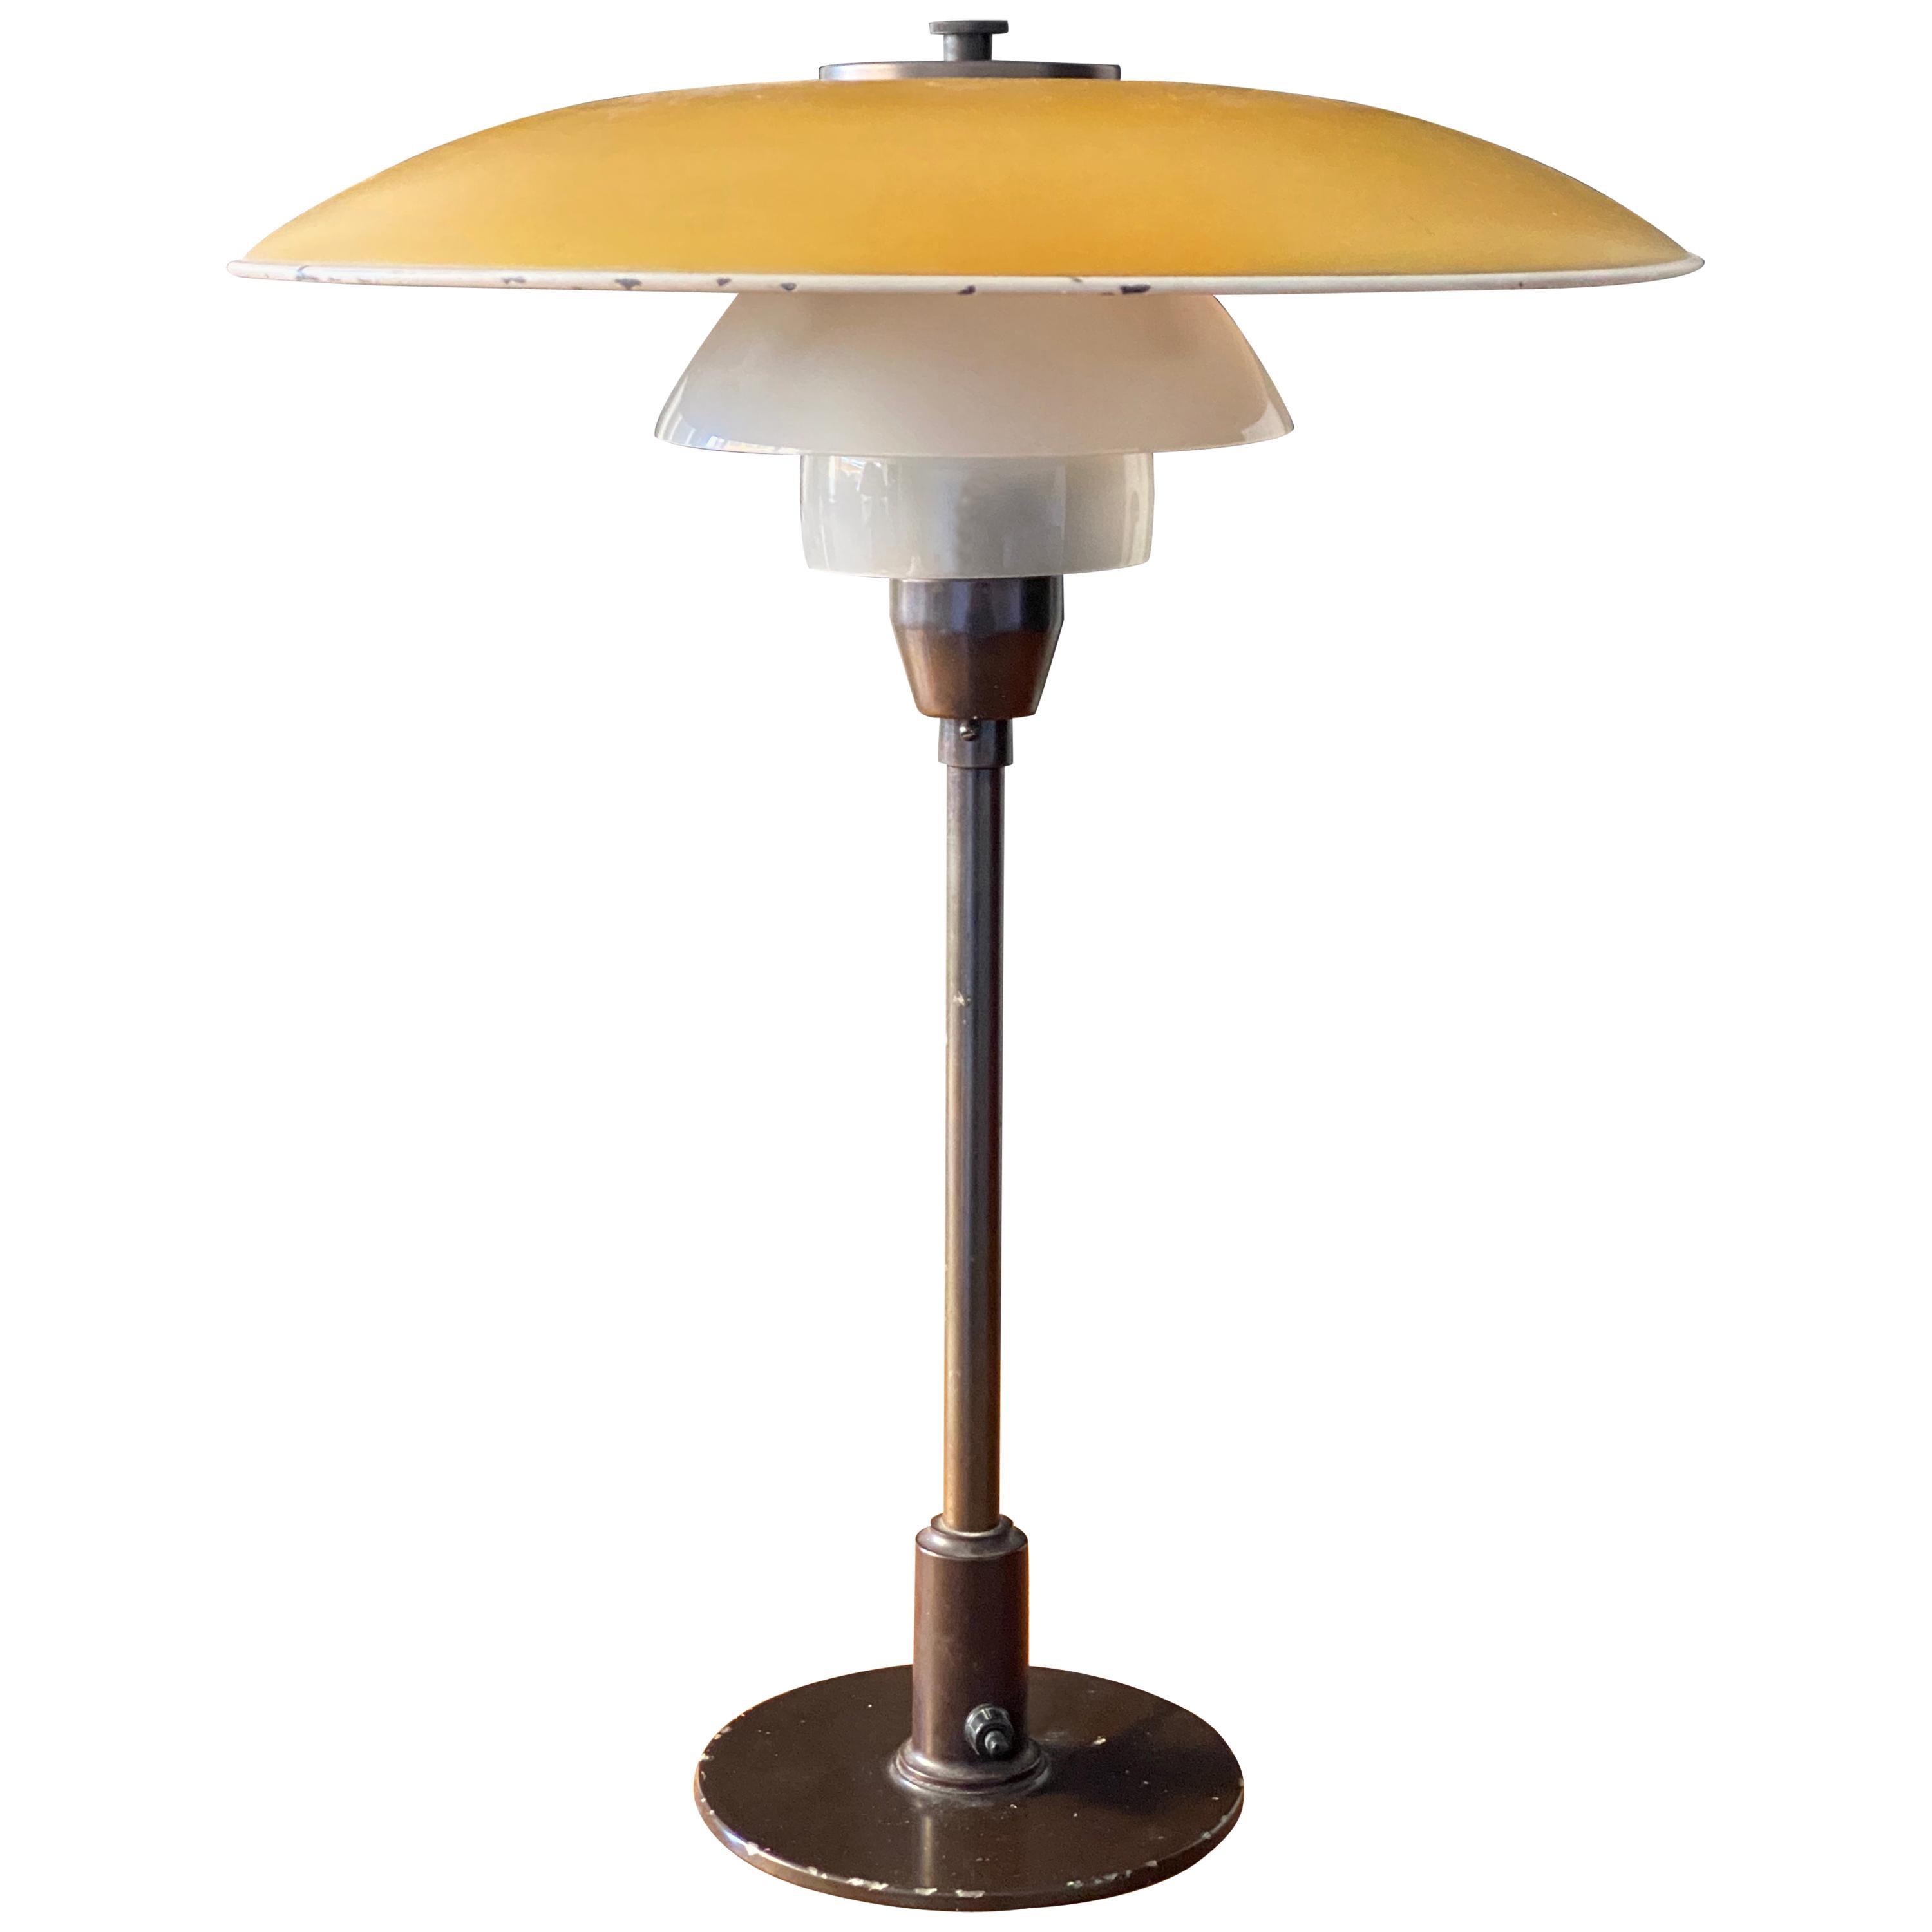 Poul Henningsen, Table Lamp, Yellow Lacqured Metal, Glass, Denmark, 20th century